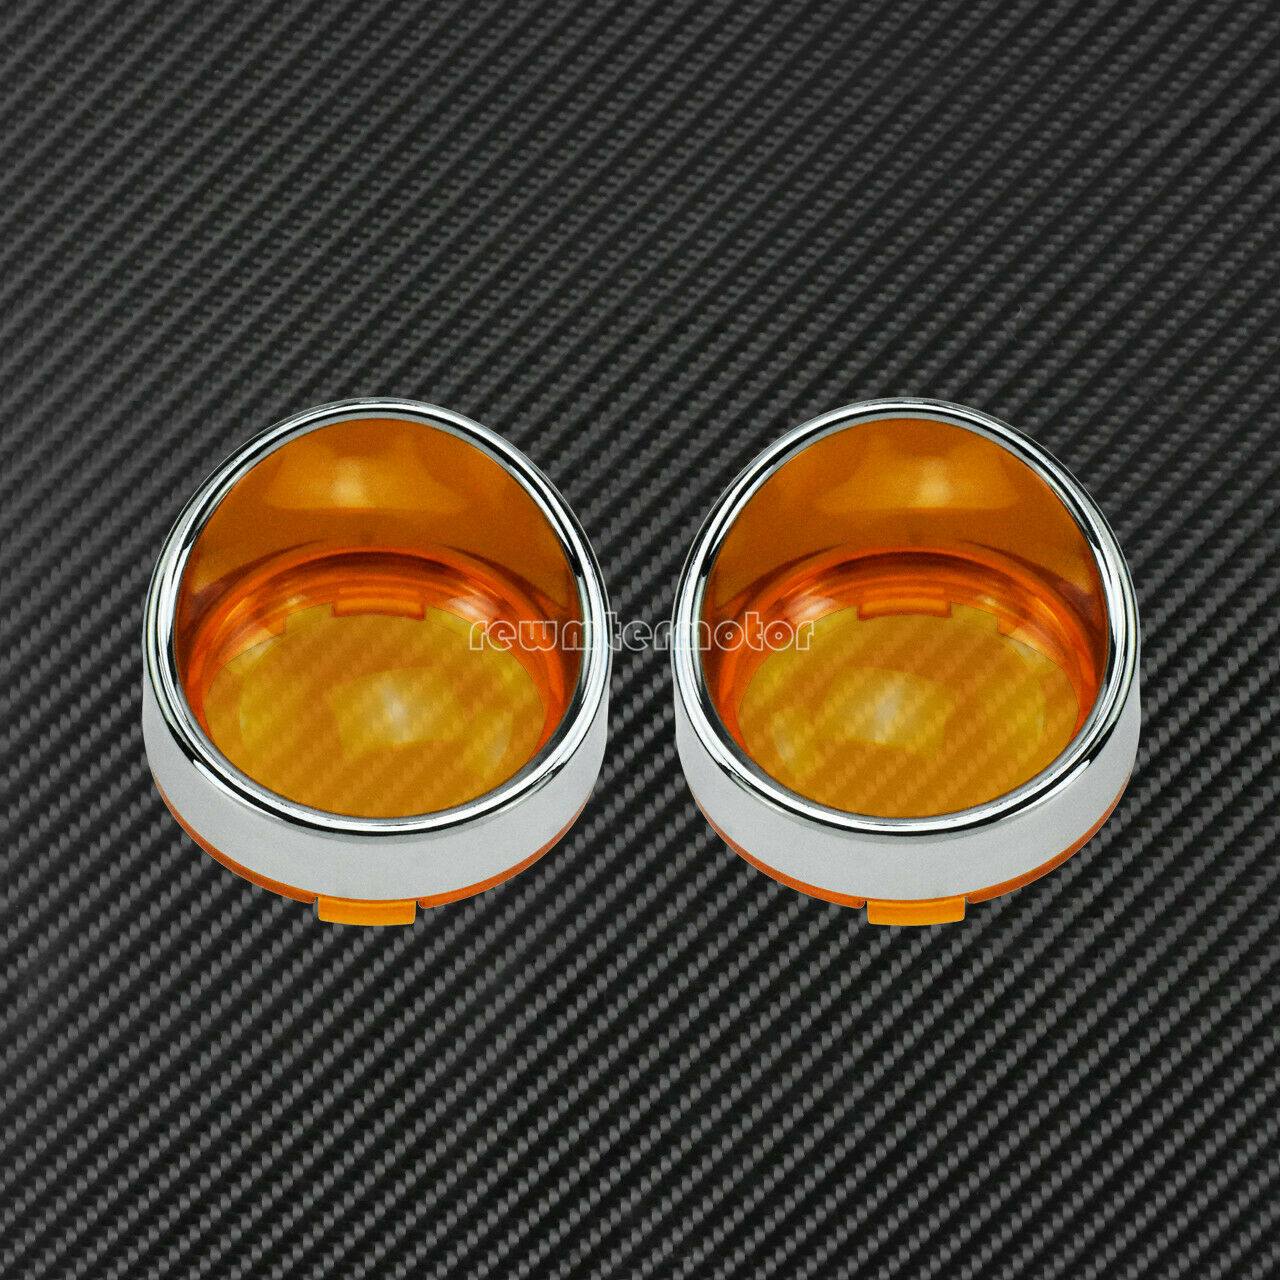 Turn Signal Lens Cover Visor Ring Fit For Harley Dyna Softail Glide Chrome Amber - Moto Life Products